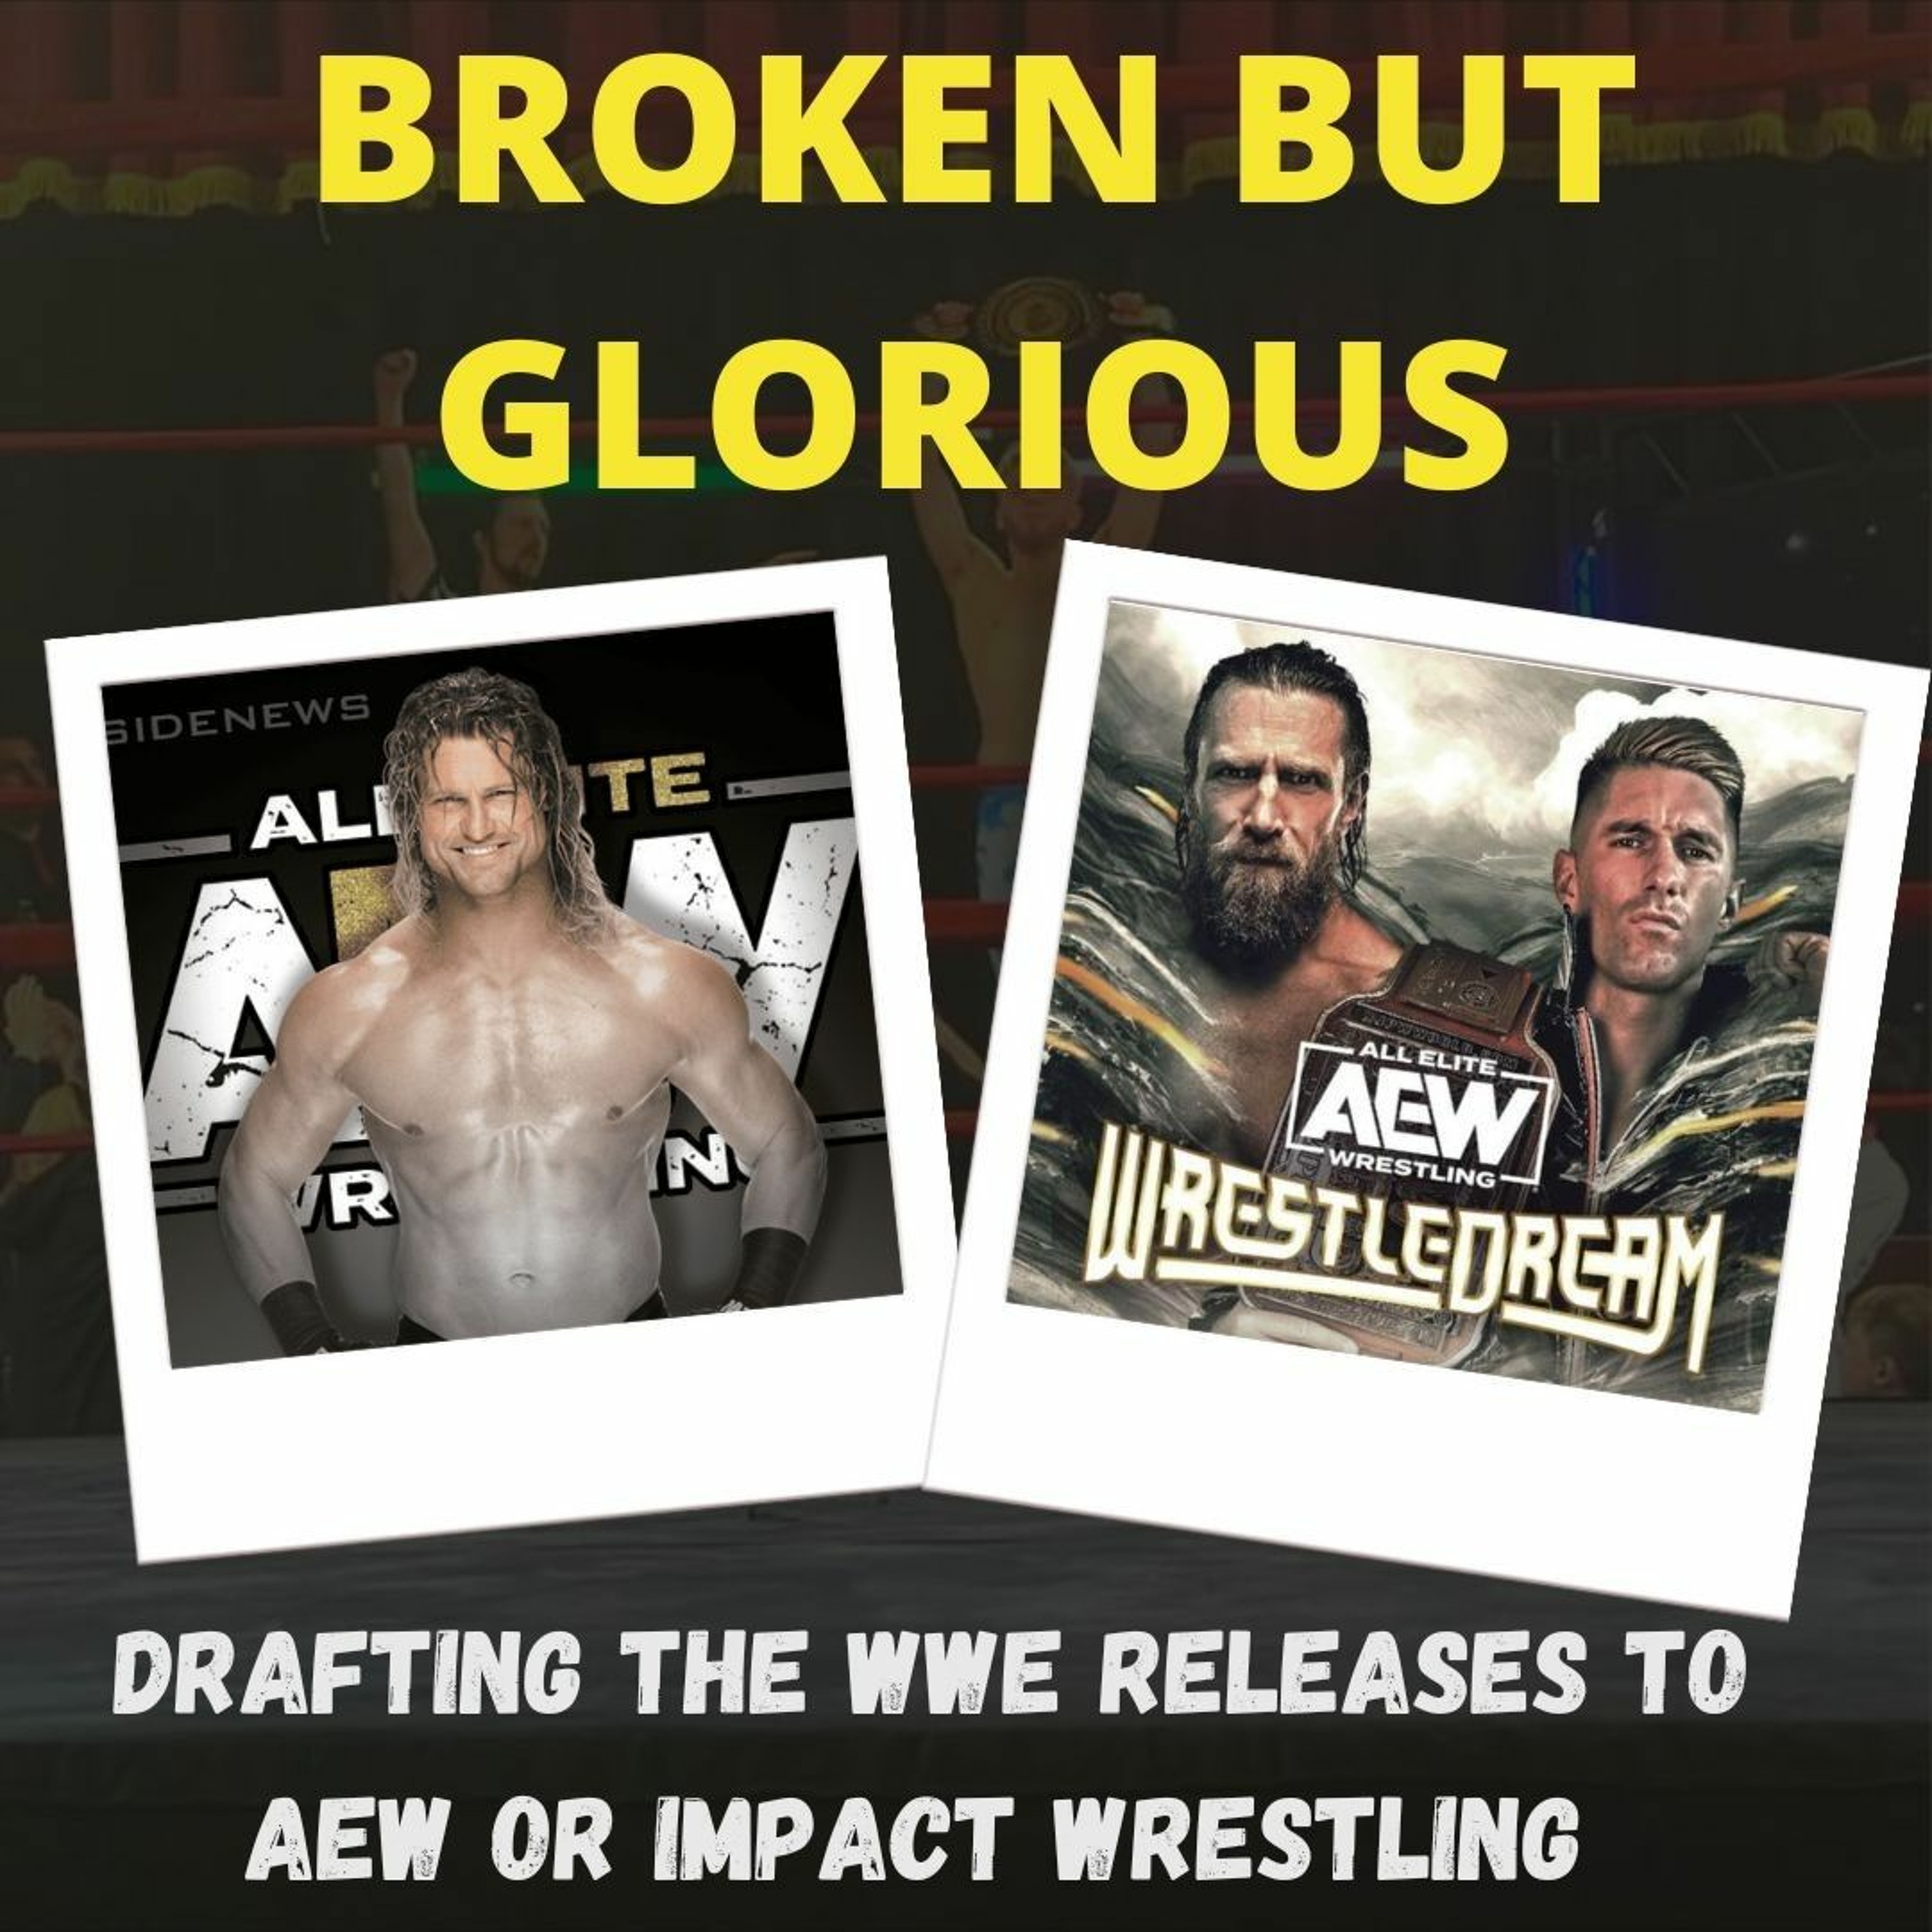 Drafting the WWE Releases to AEW or IMPACT Wrestling! AEW WrestleDream Preview